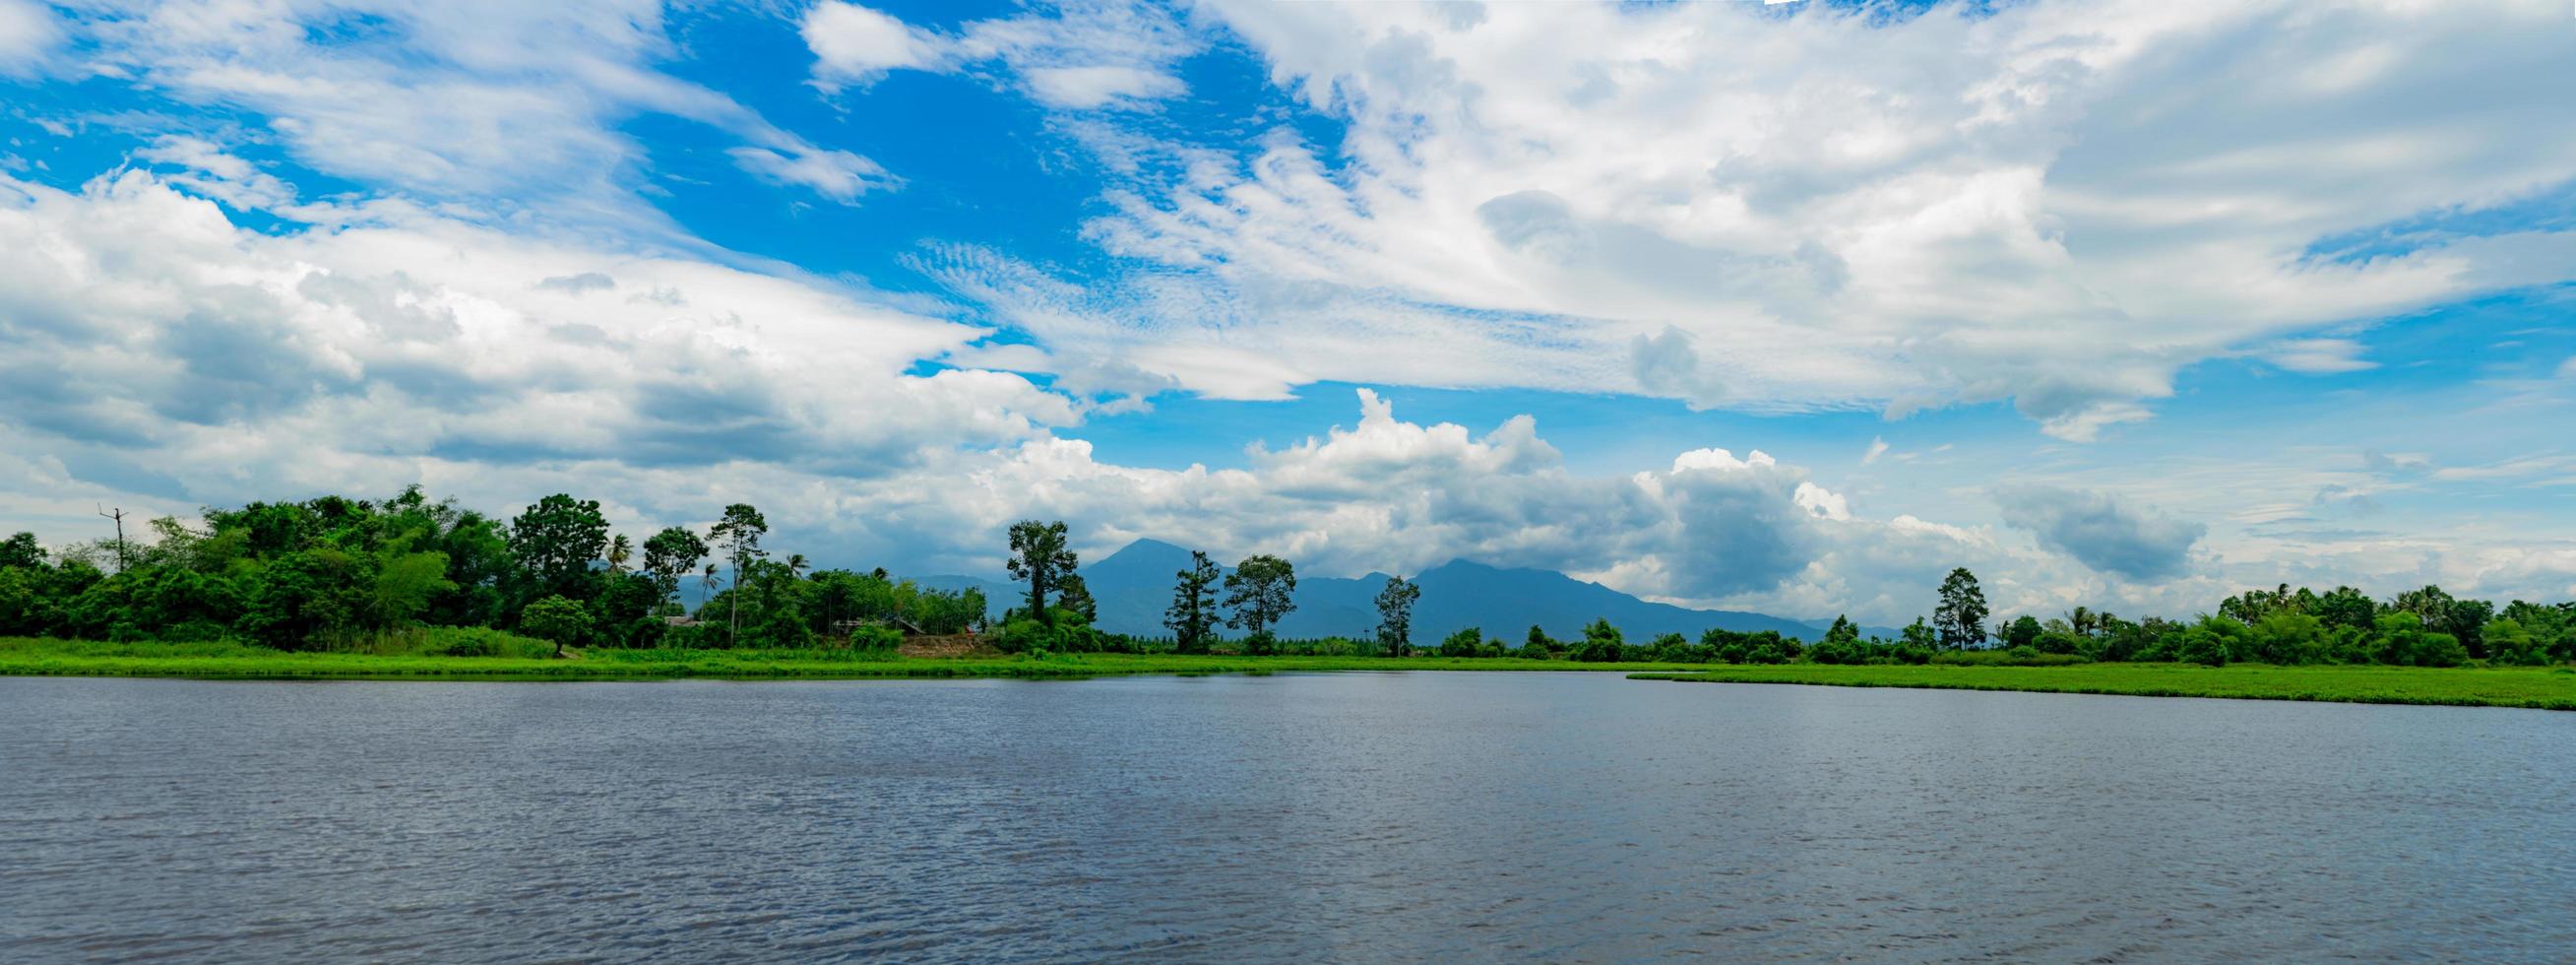 Beautiful landscape view of lake in front of the mountain with blue sky and white cumulus clouds. Green tree and grass field around pond. Tropical weather in summer. Nature landscape. Fresh air. photo